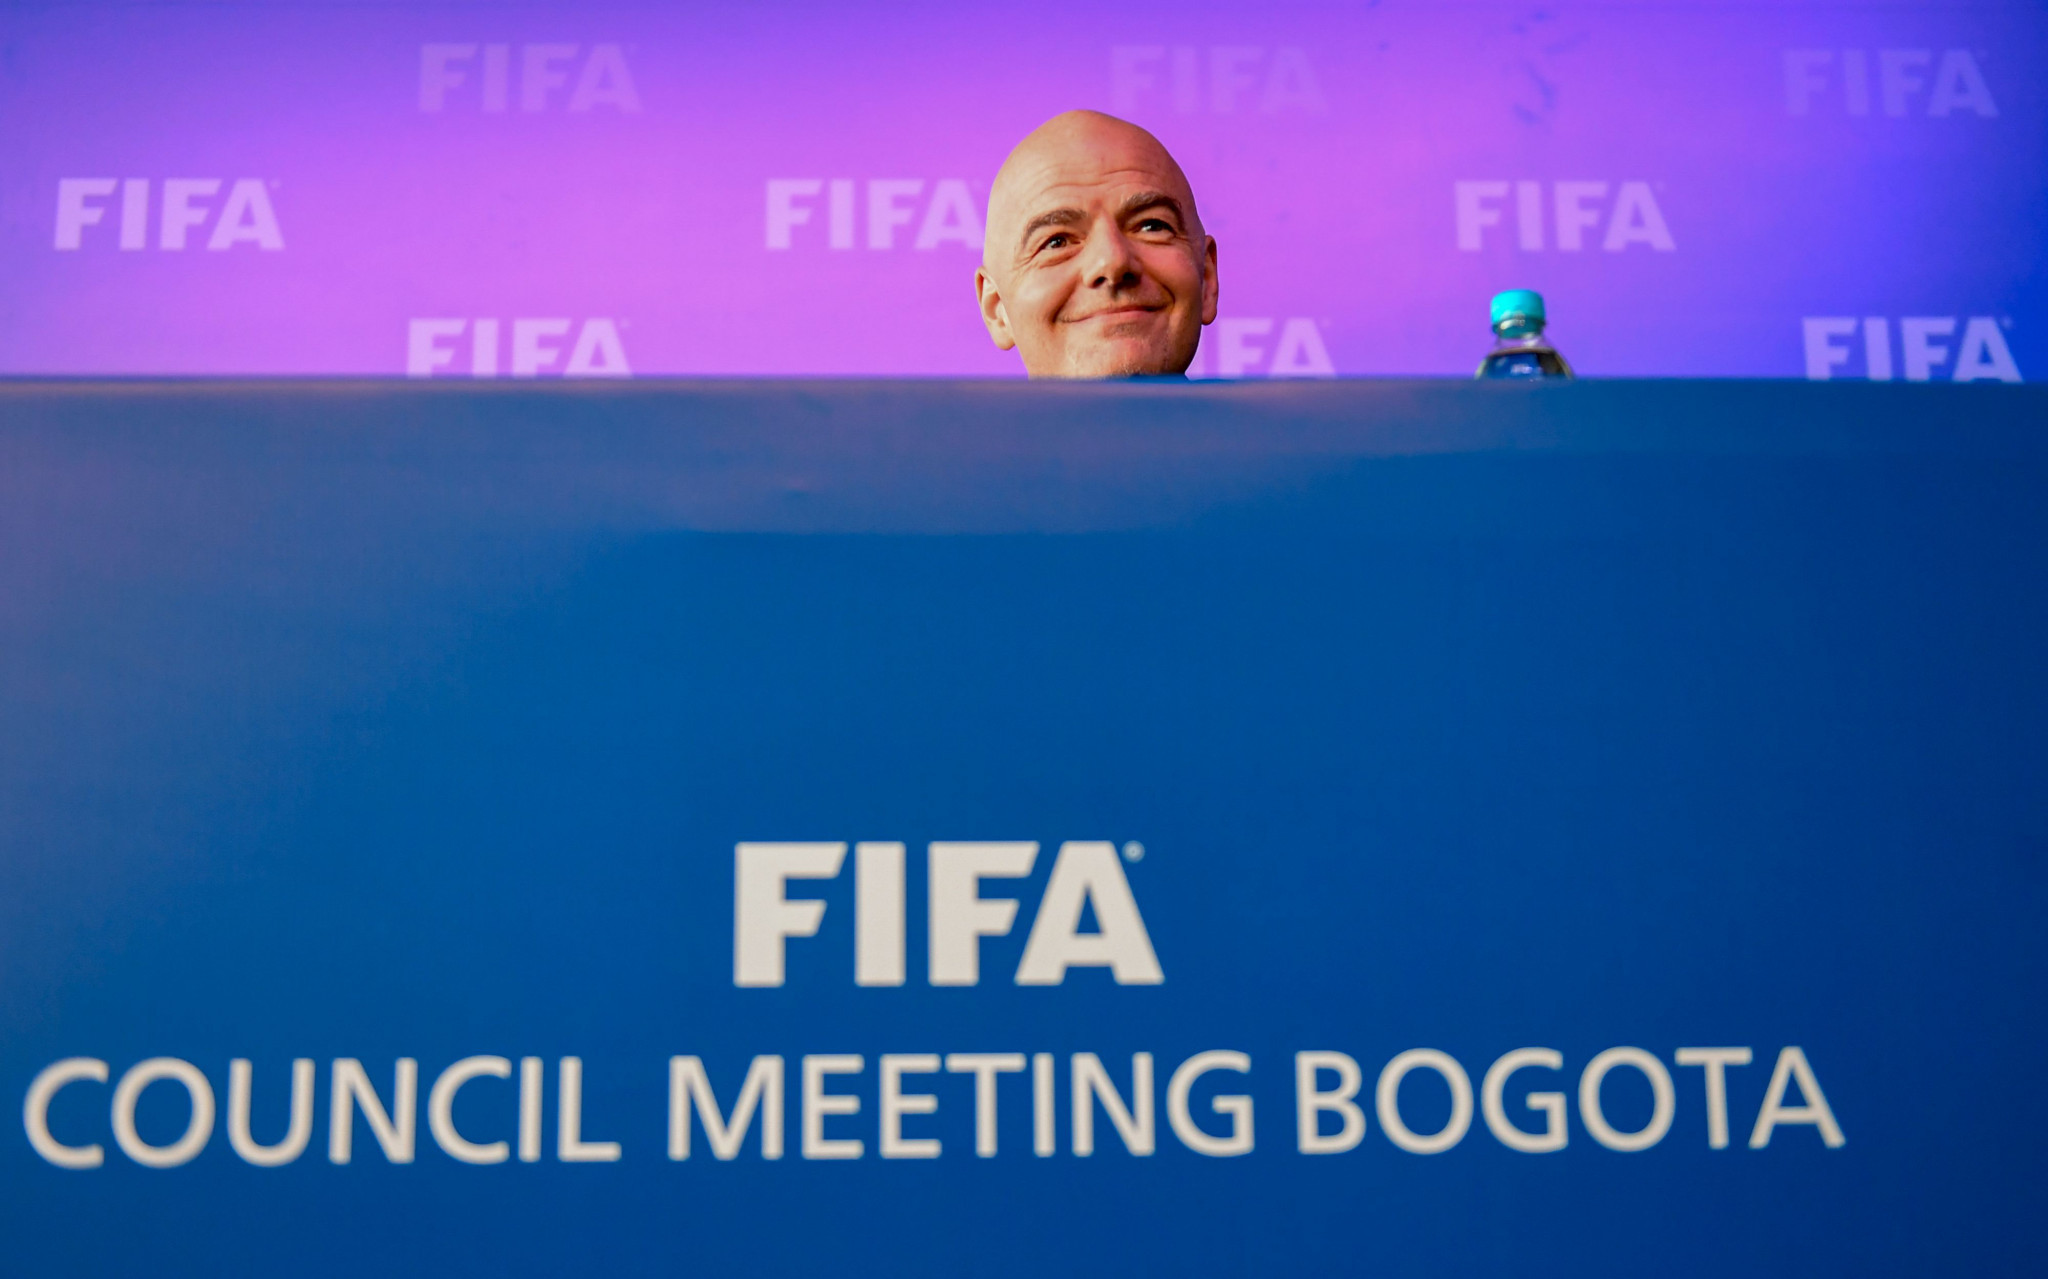 FIFA President Gianni Infantino announced the news in Bogota ©Getty Images